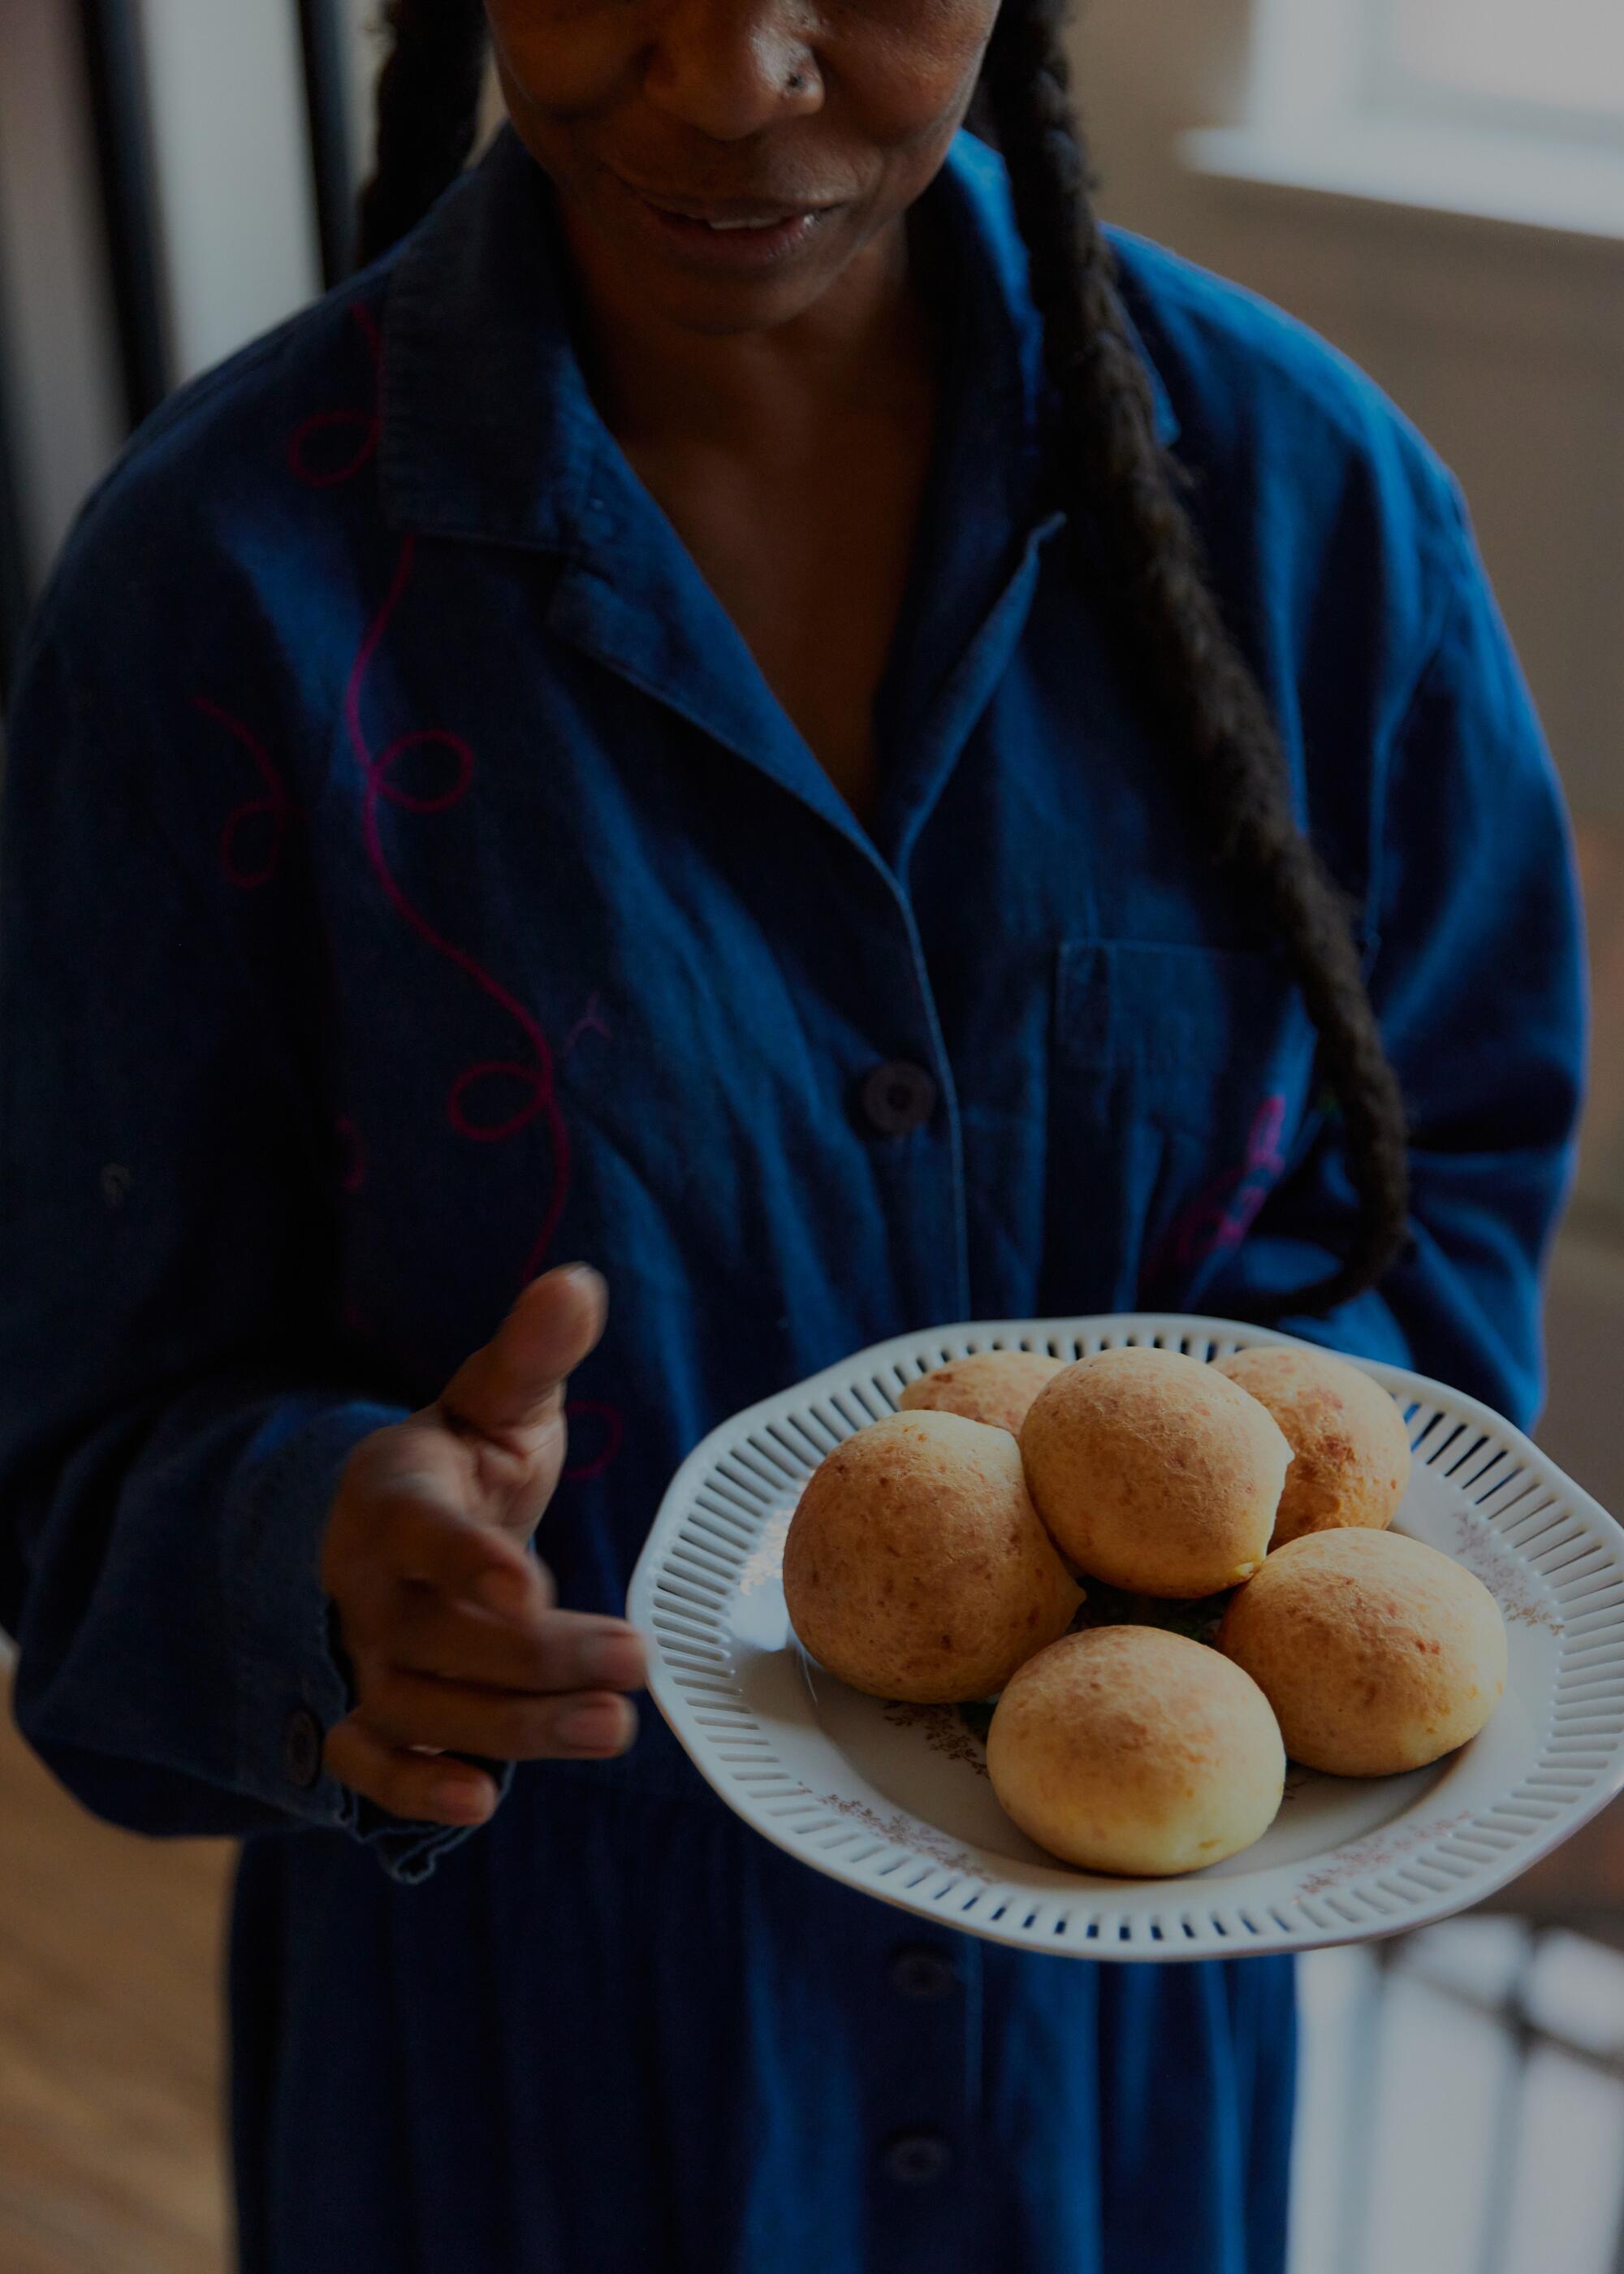 A plate of pão de queijo, fresh out of the oven.